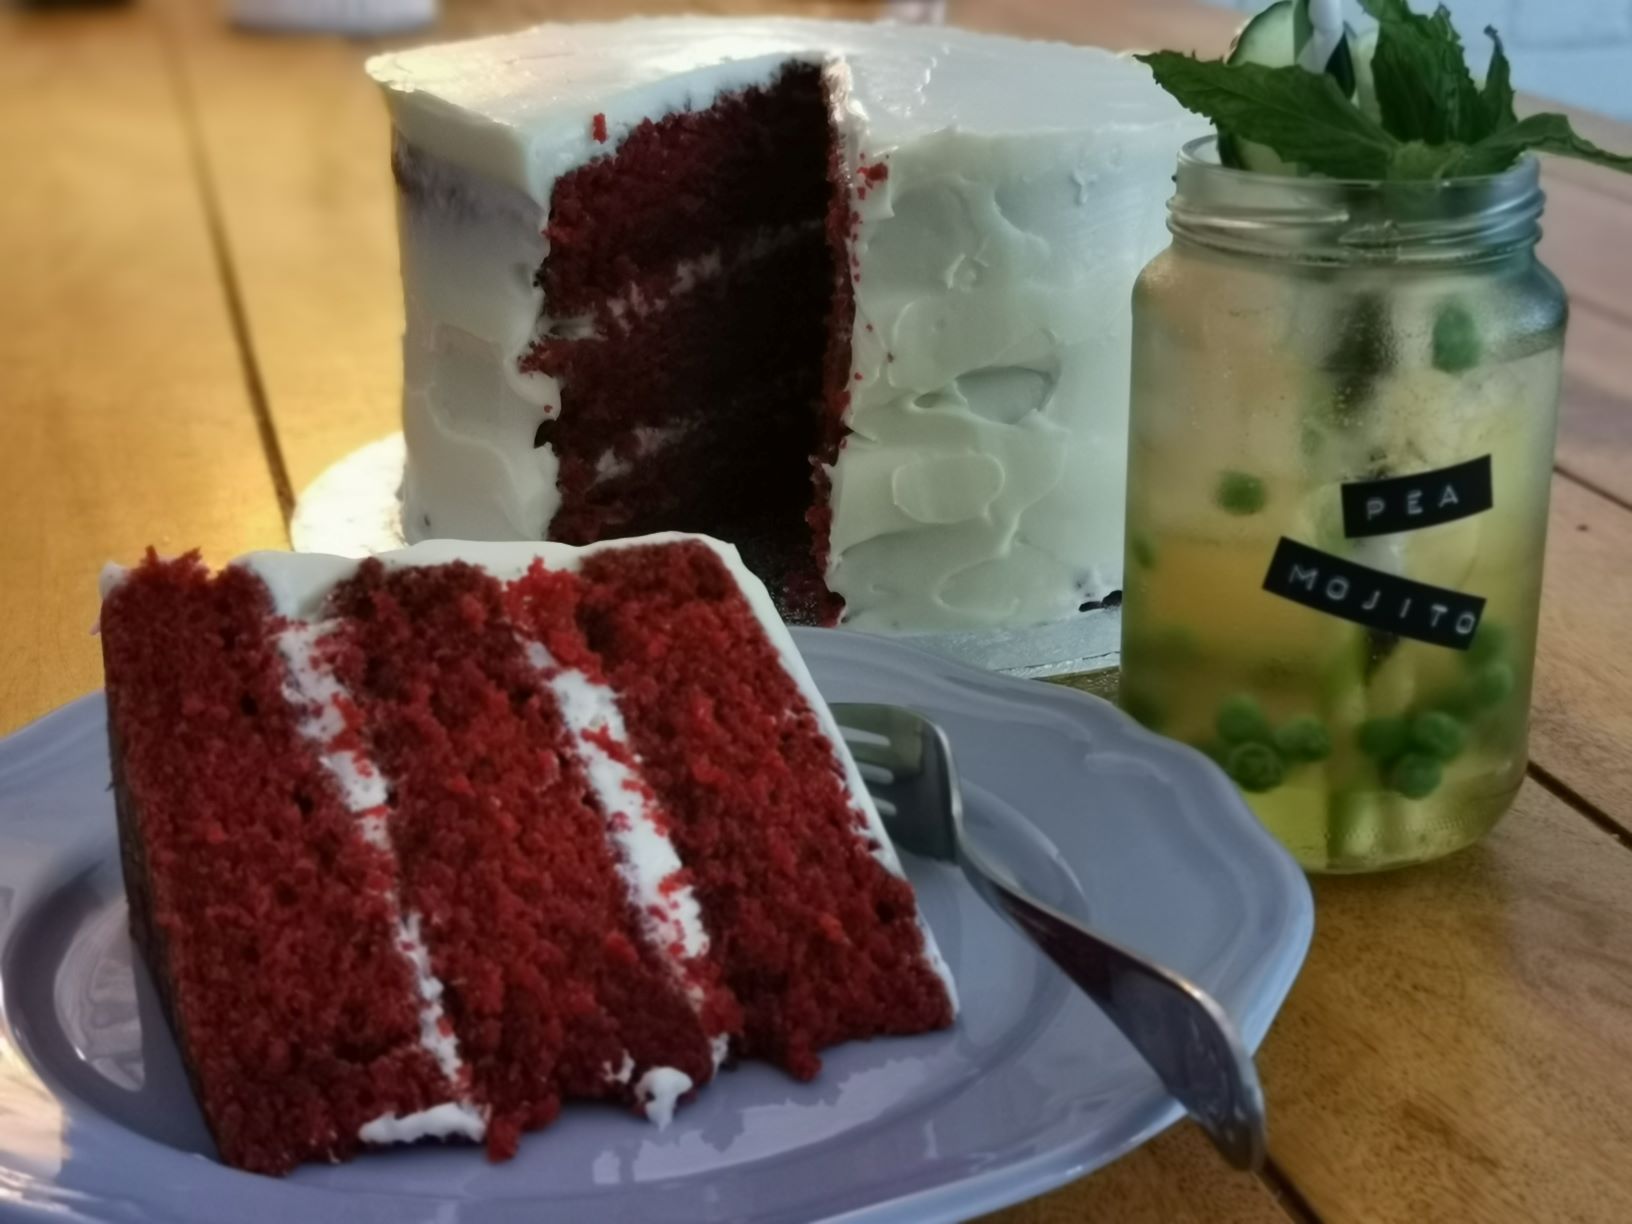 Cake and kocktail with The Twisted Drink Co